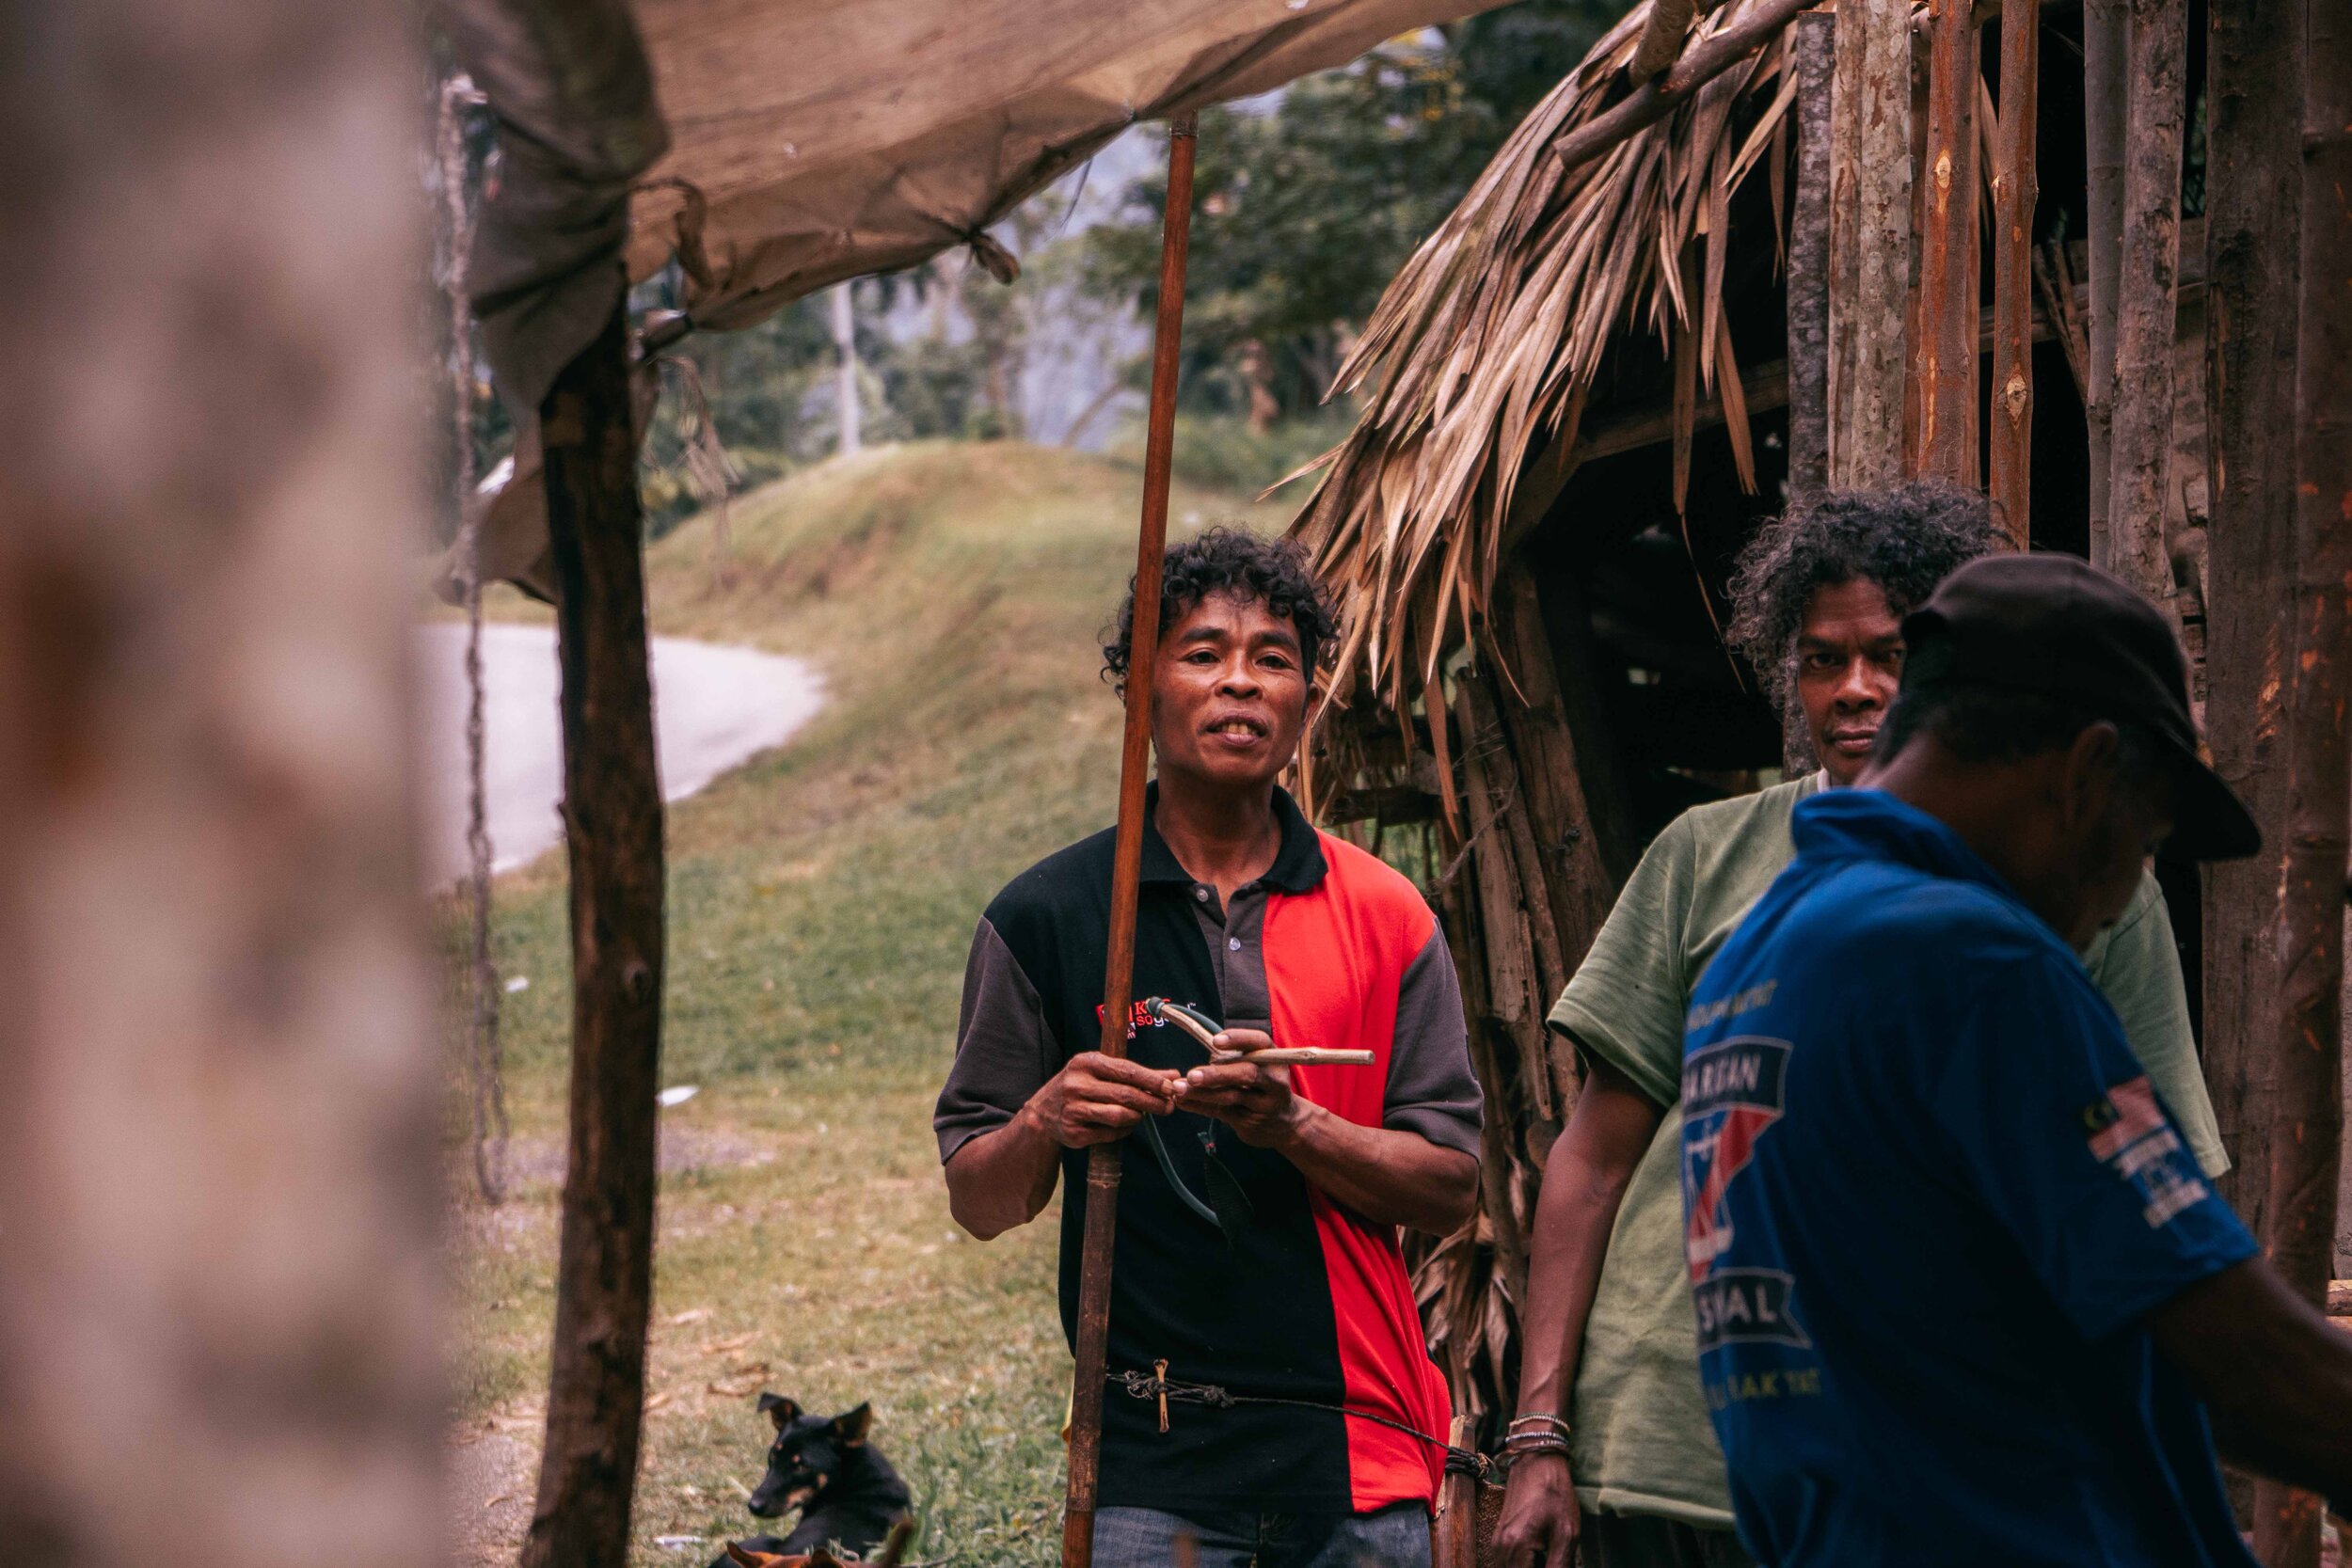  Our guide then introduced us to the rest of the Orang Asli living in this small village. One of them showed us his blowpipe — used to kill wild boars, and injure trespassers.  Yes, that long stick he’s holding is a  weapon .    